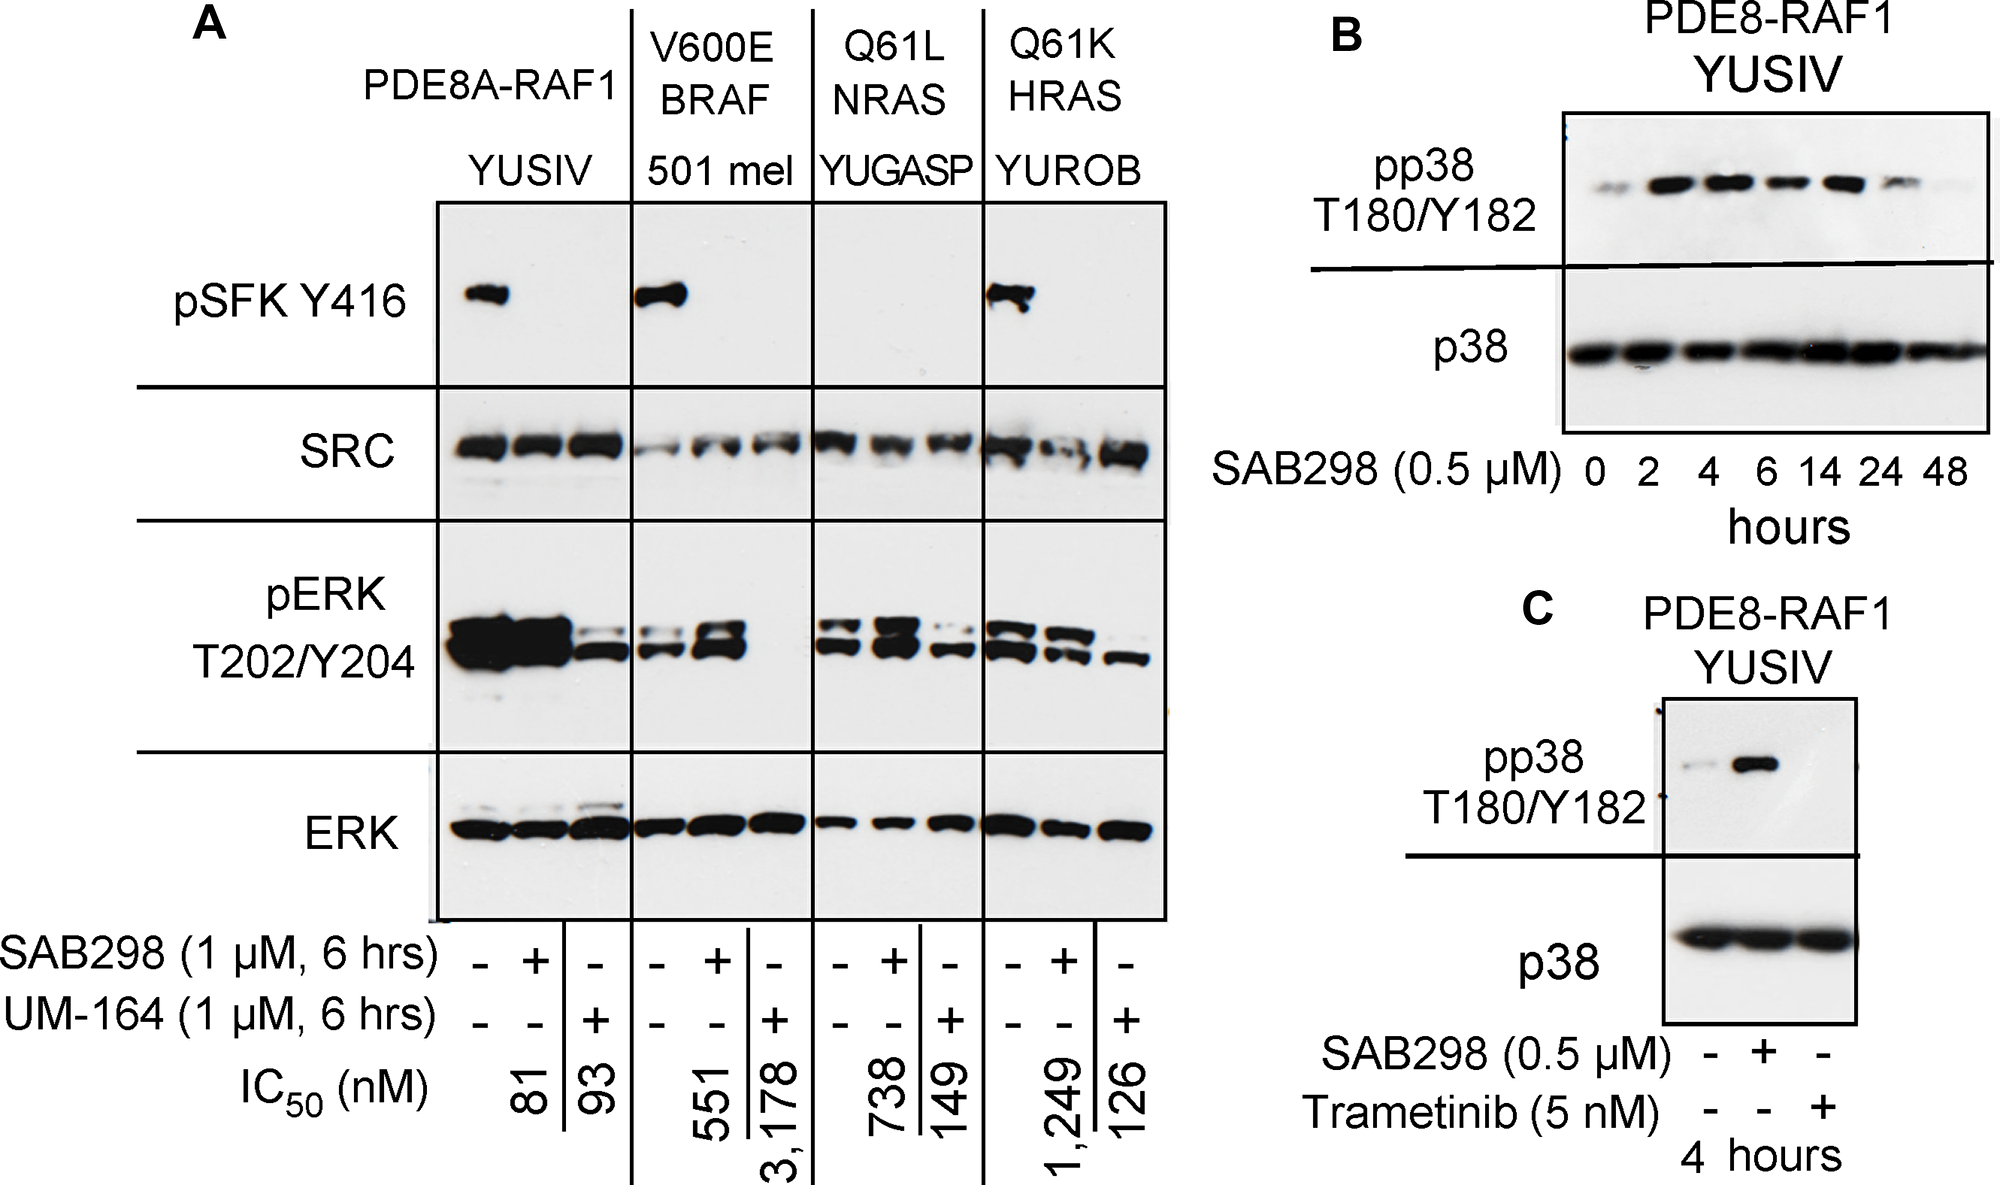 SAB298 and UM-164 inhibit SFK activity but have opposite effects on ERK and p38.